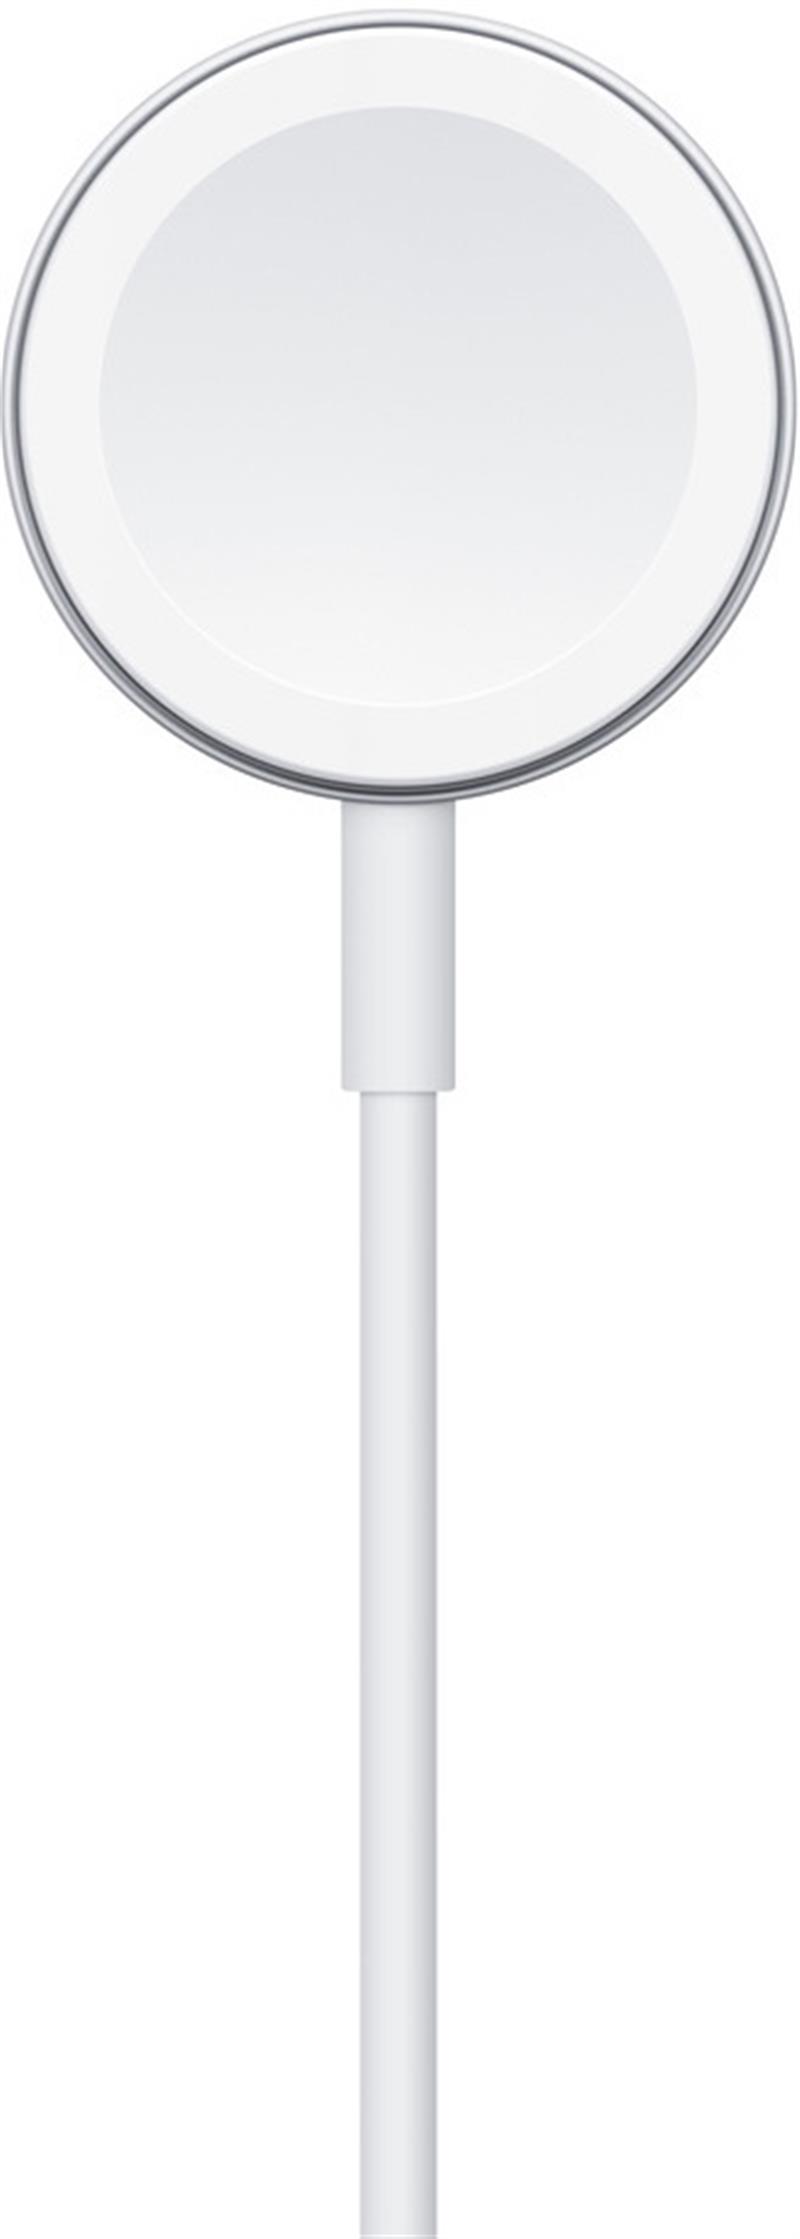 APPLE Watch Magnetic Charging Cable 1m